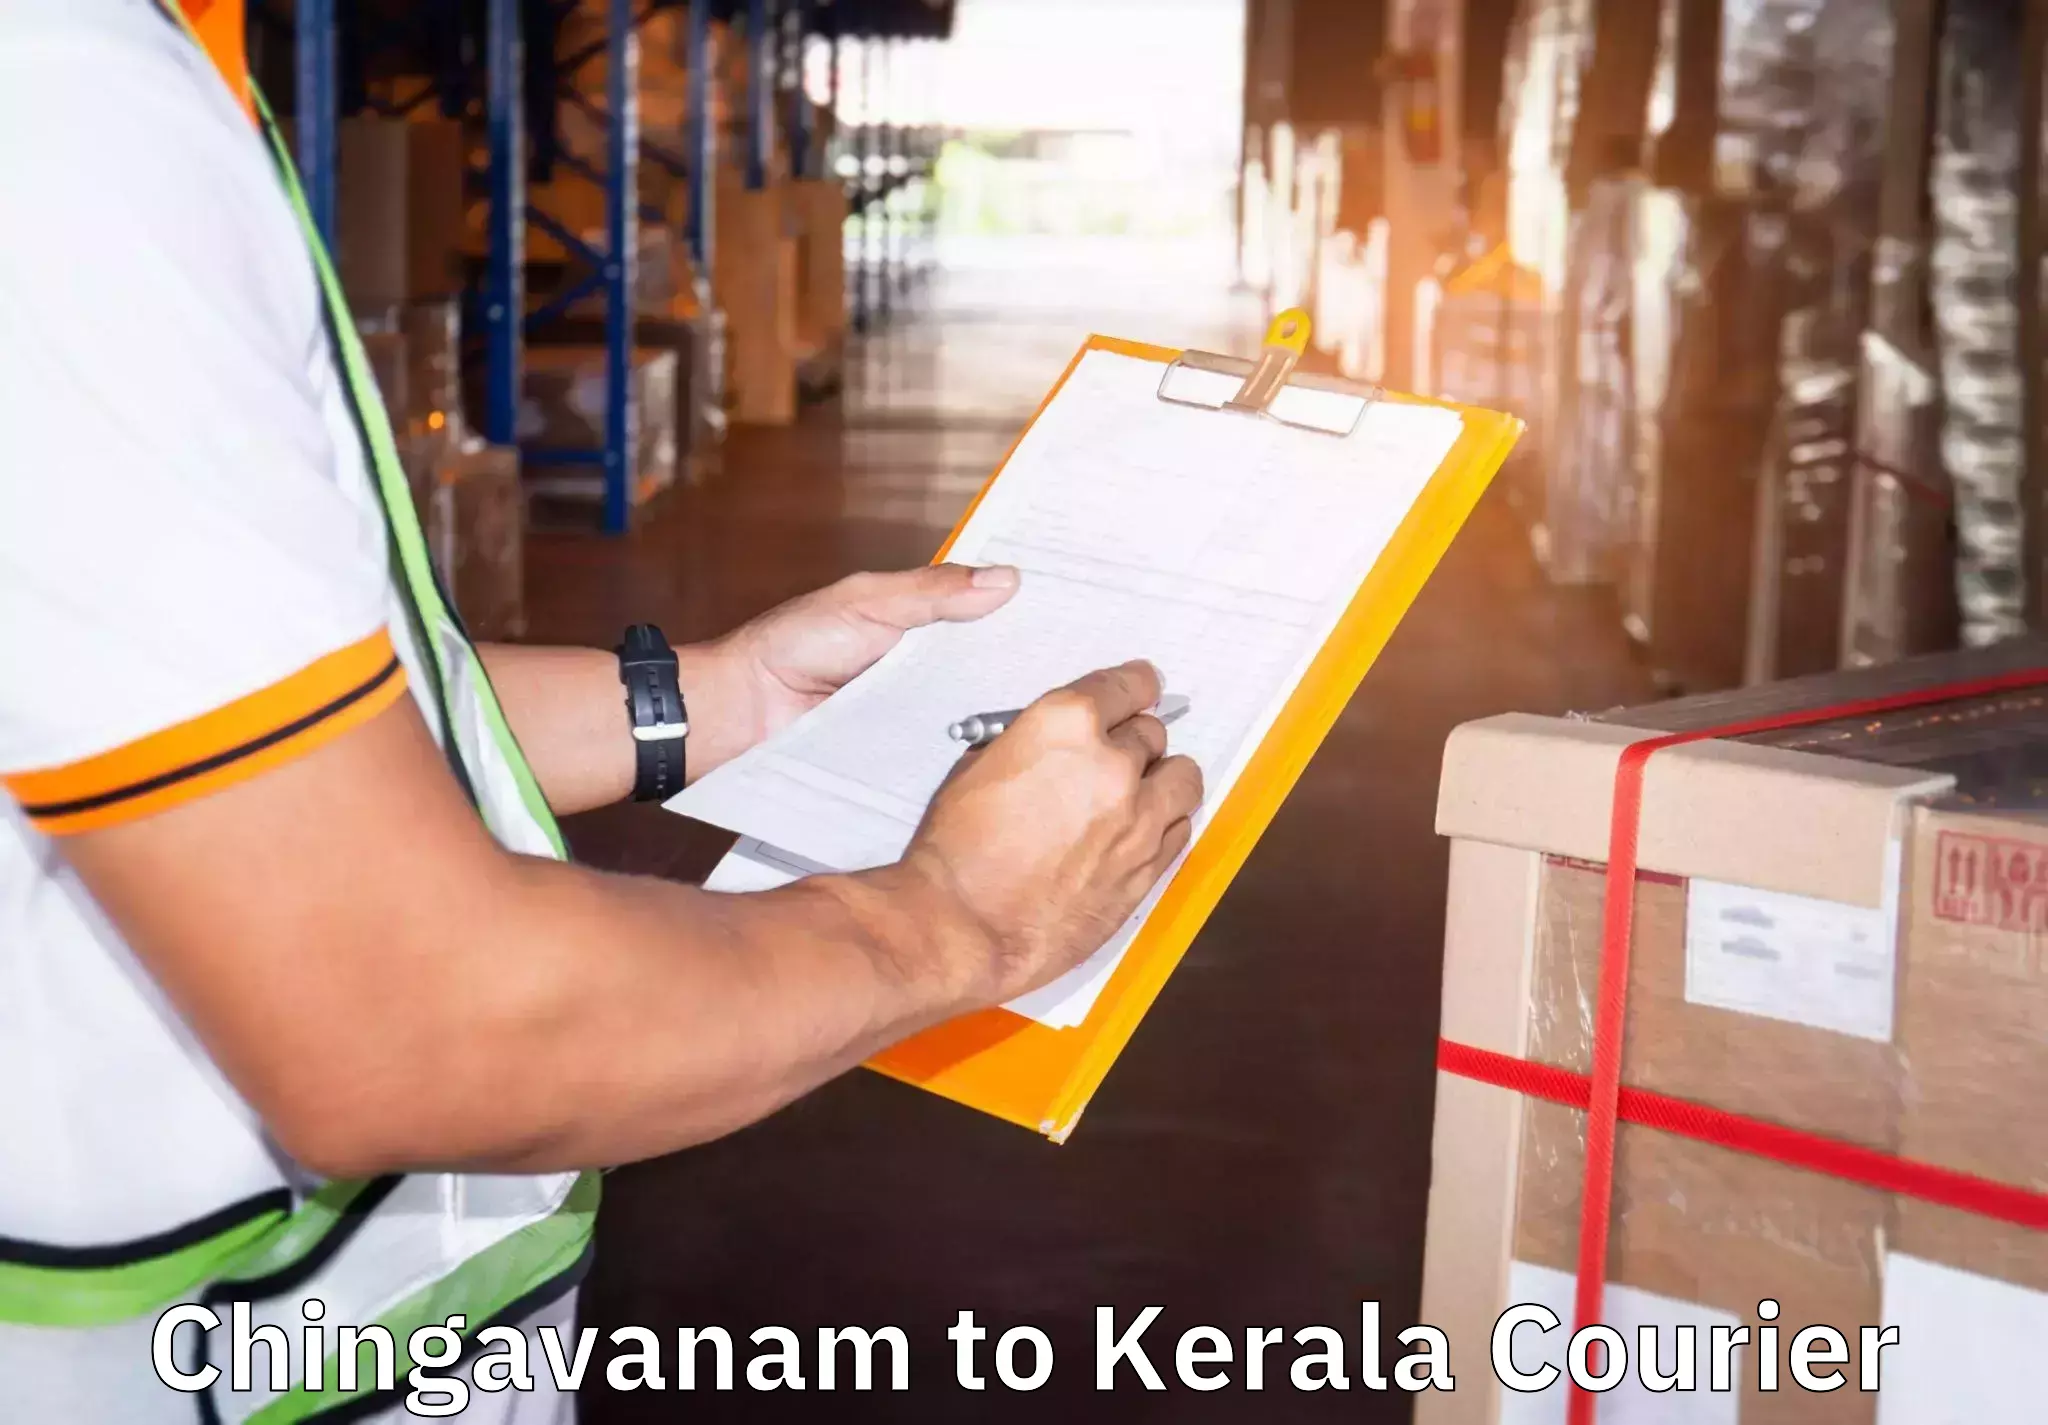 Furniture delivery service Chingavanam to Kerala